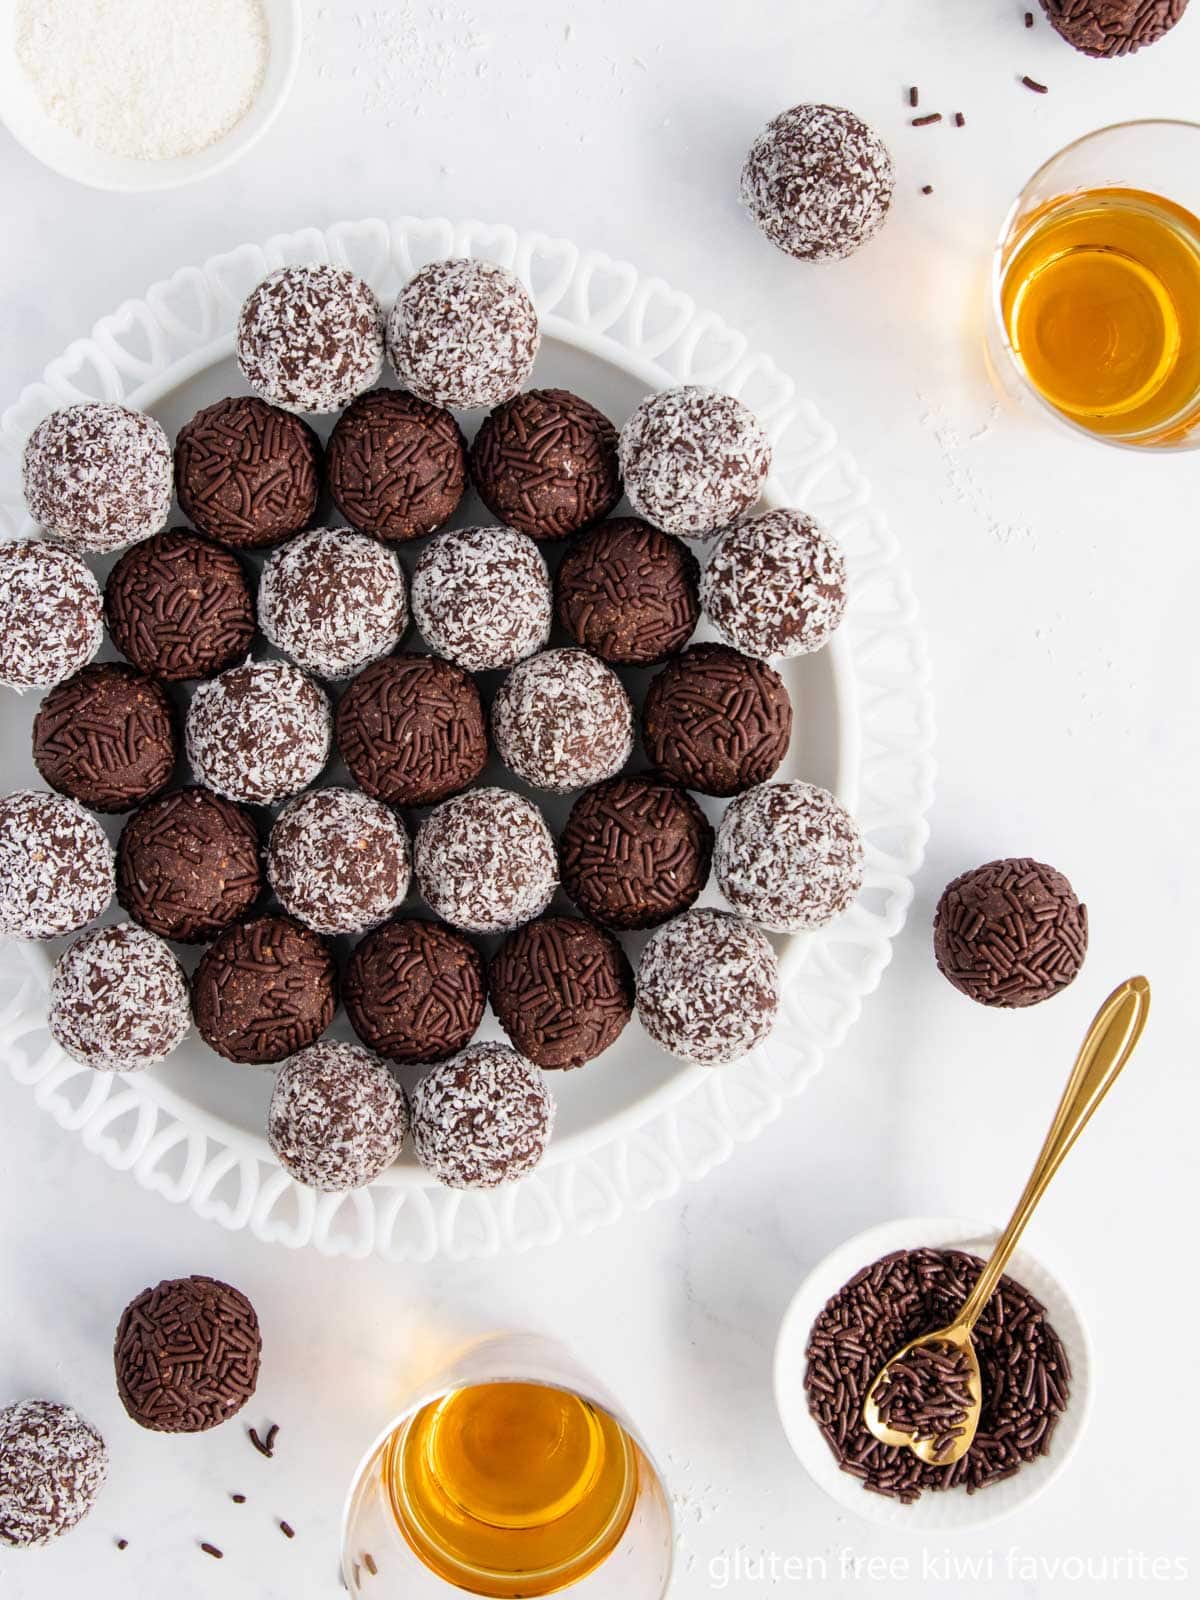 Rum balls arranged in a circular pattern on a white plate.